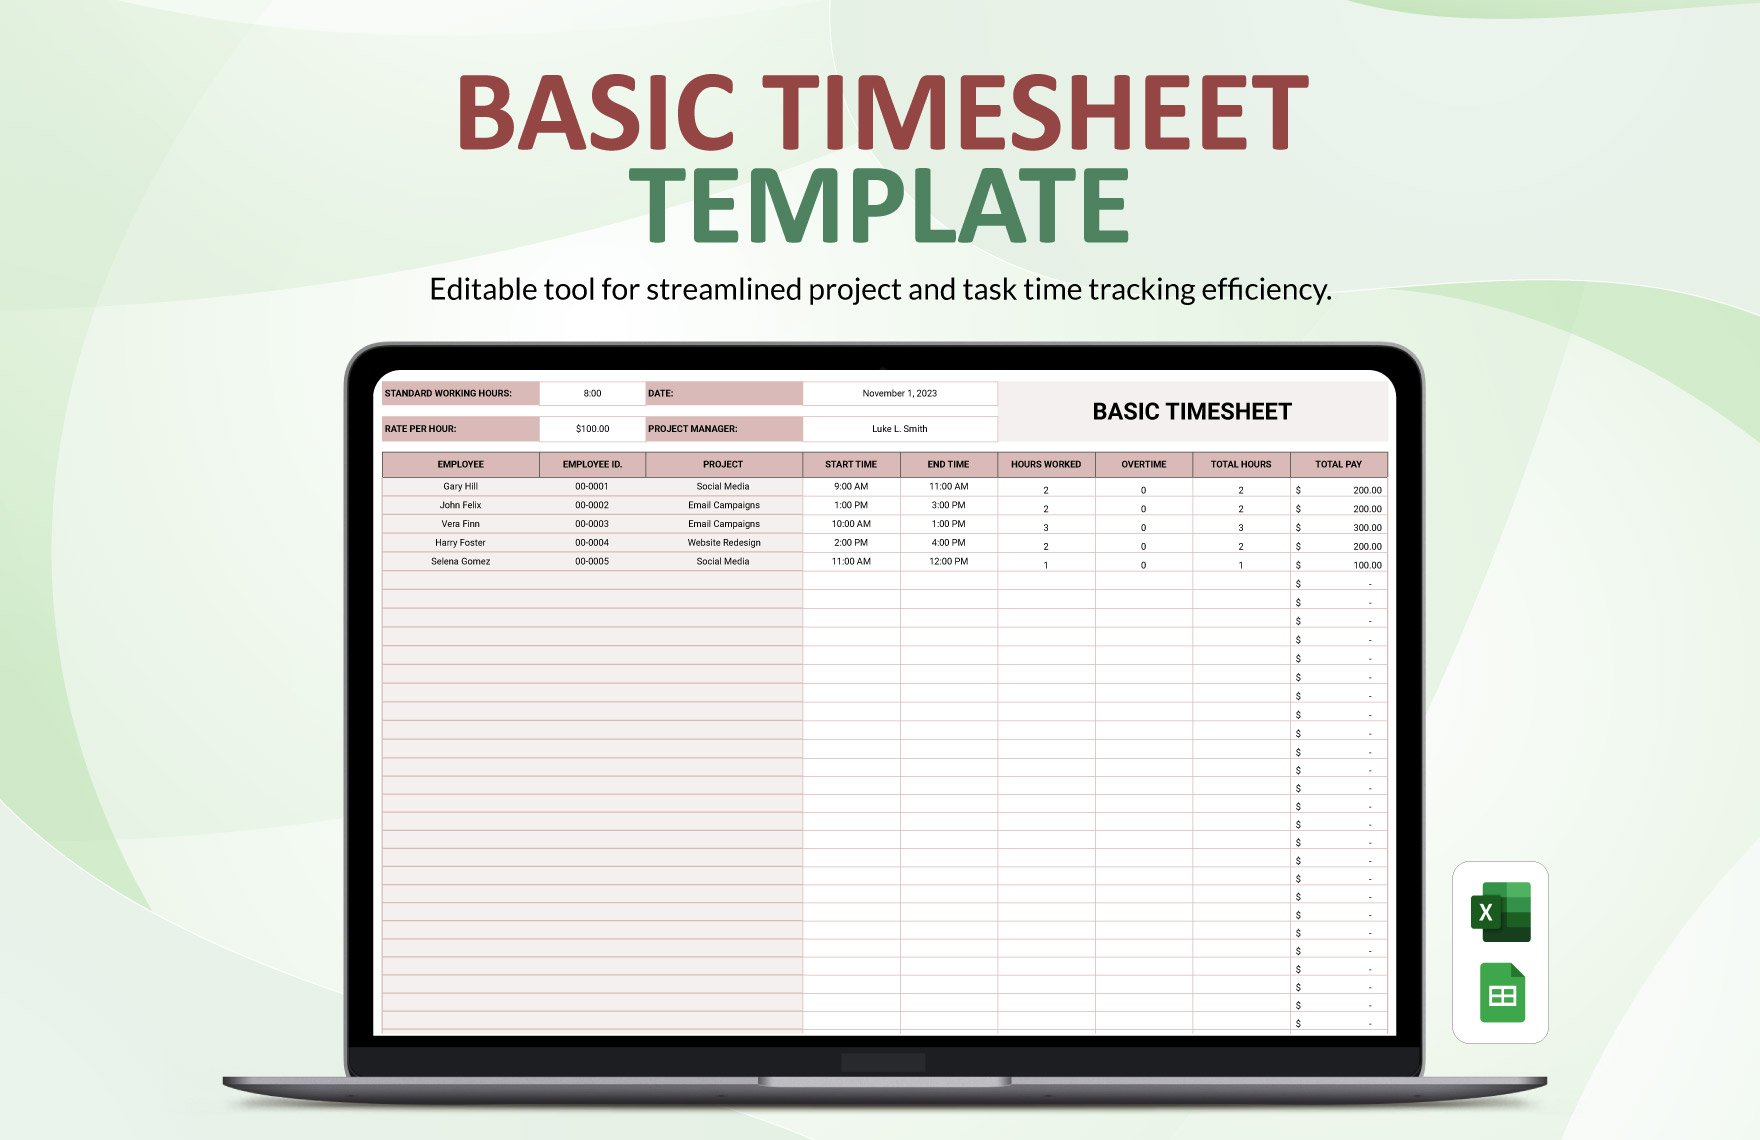 Free Basic Timesheet Template in Excel, Google Sheets